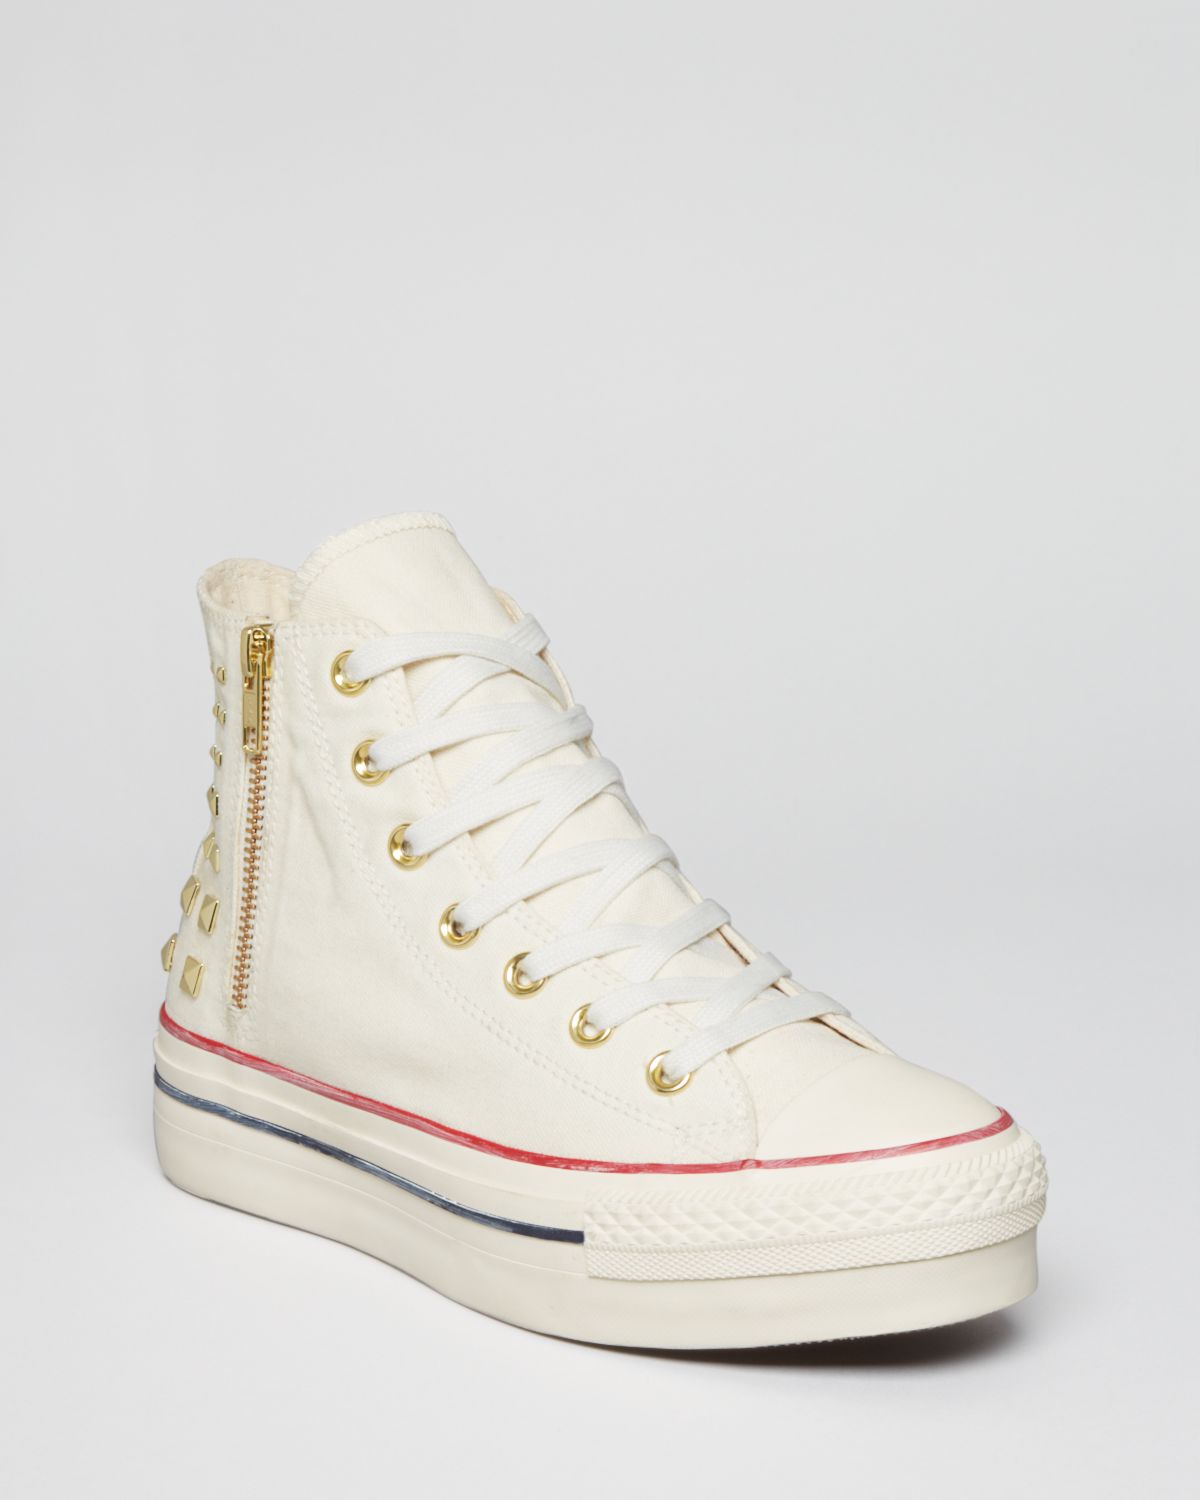 Converse Lace Up High Top Platform Sneakers All Star Collar Studs in